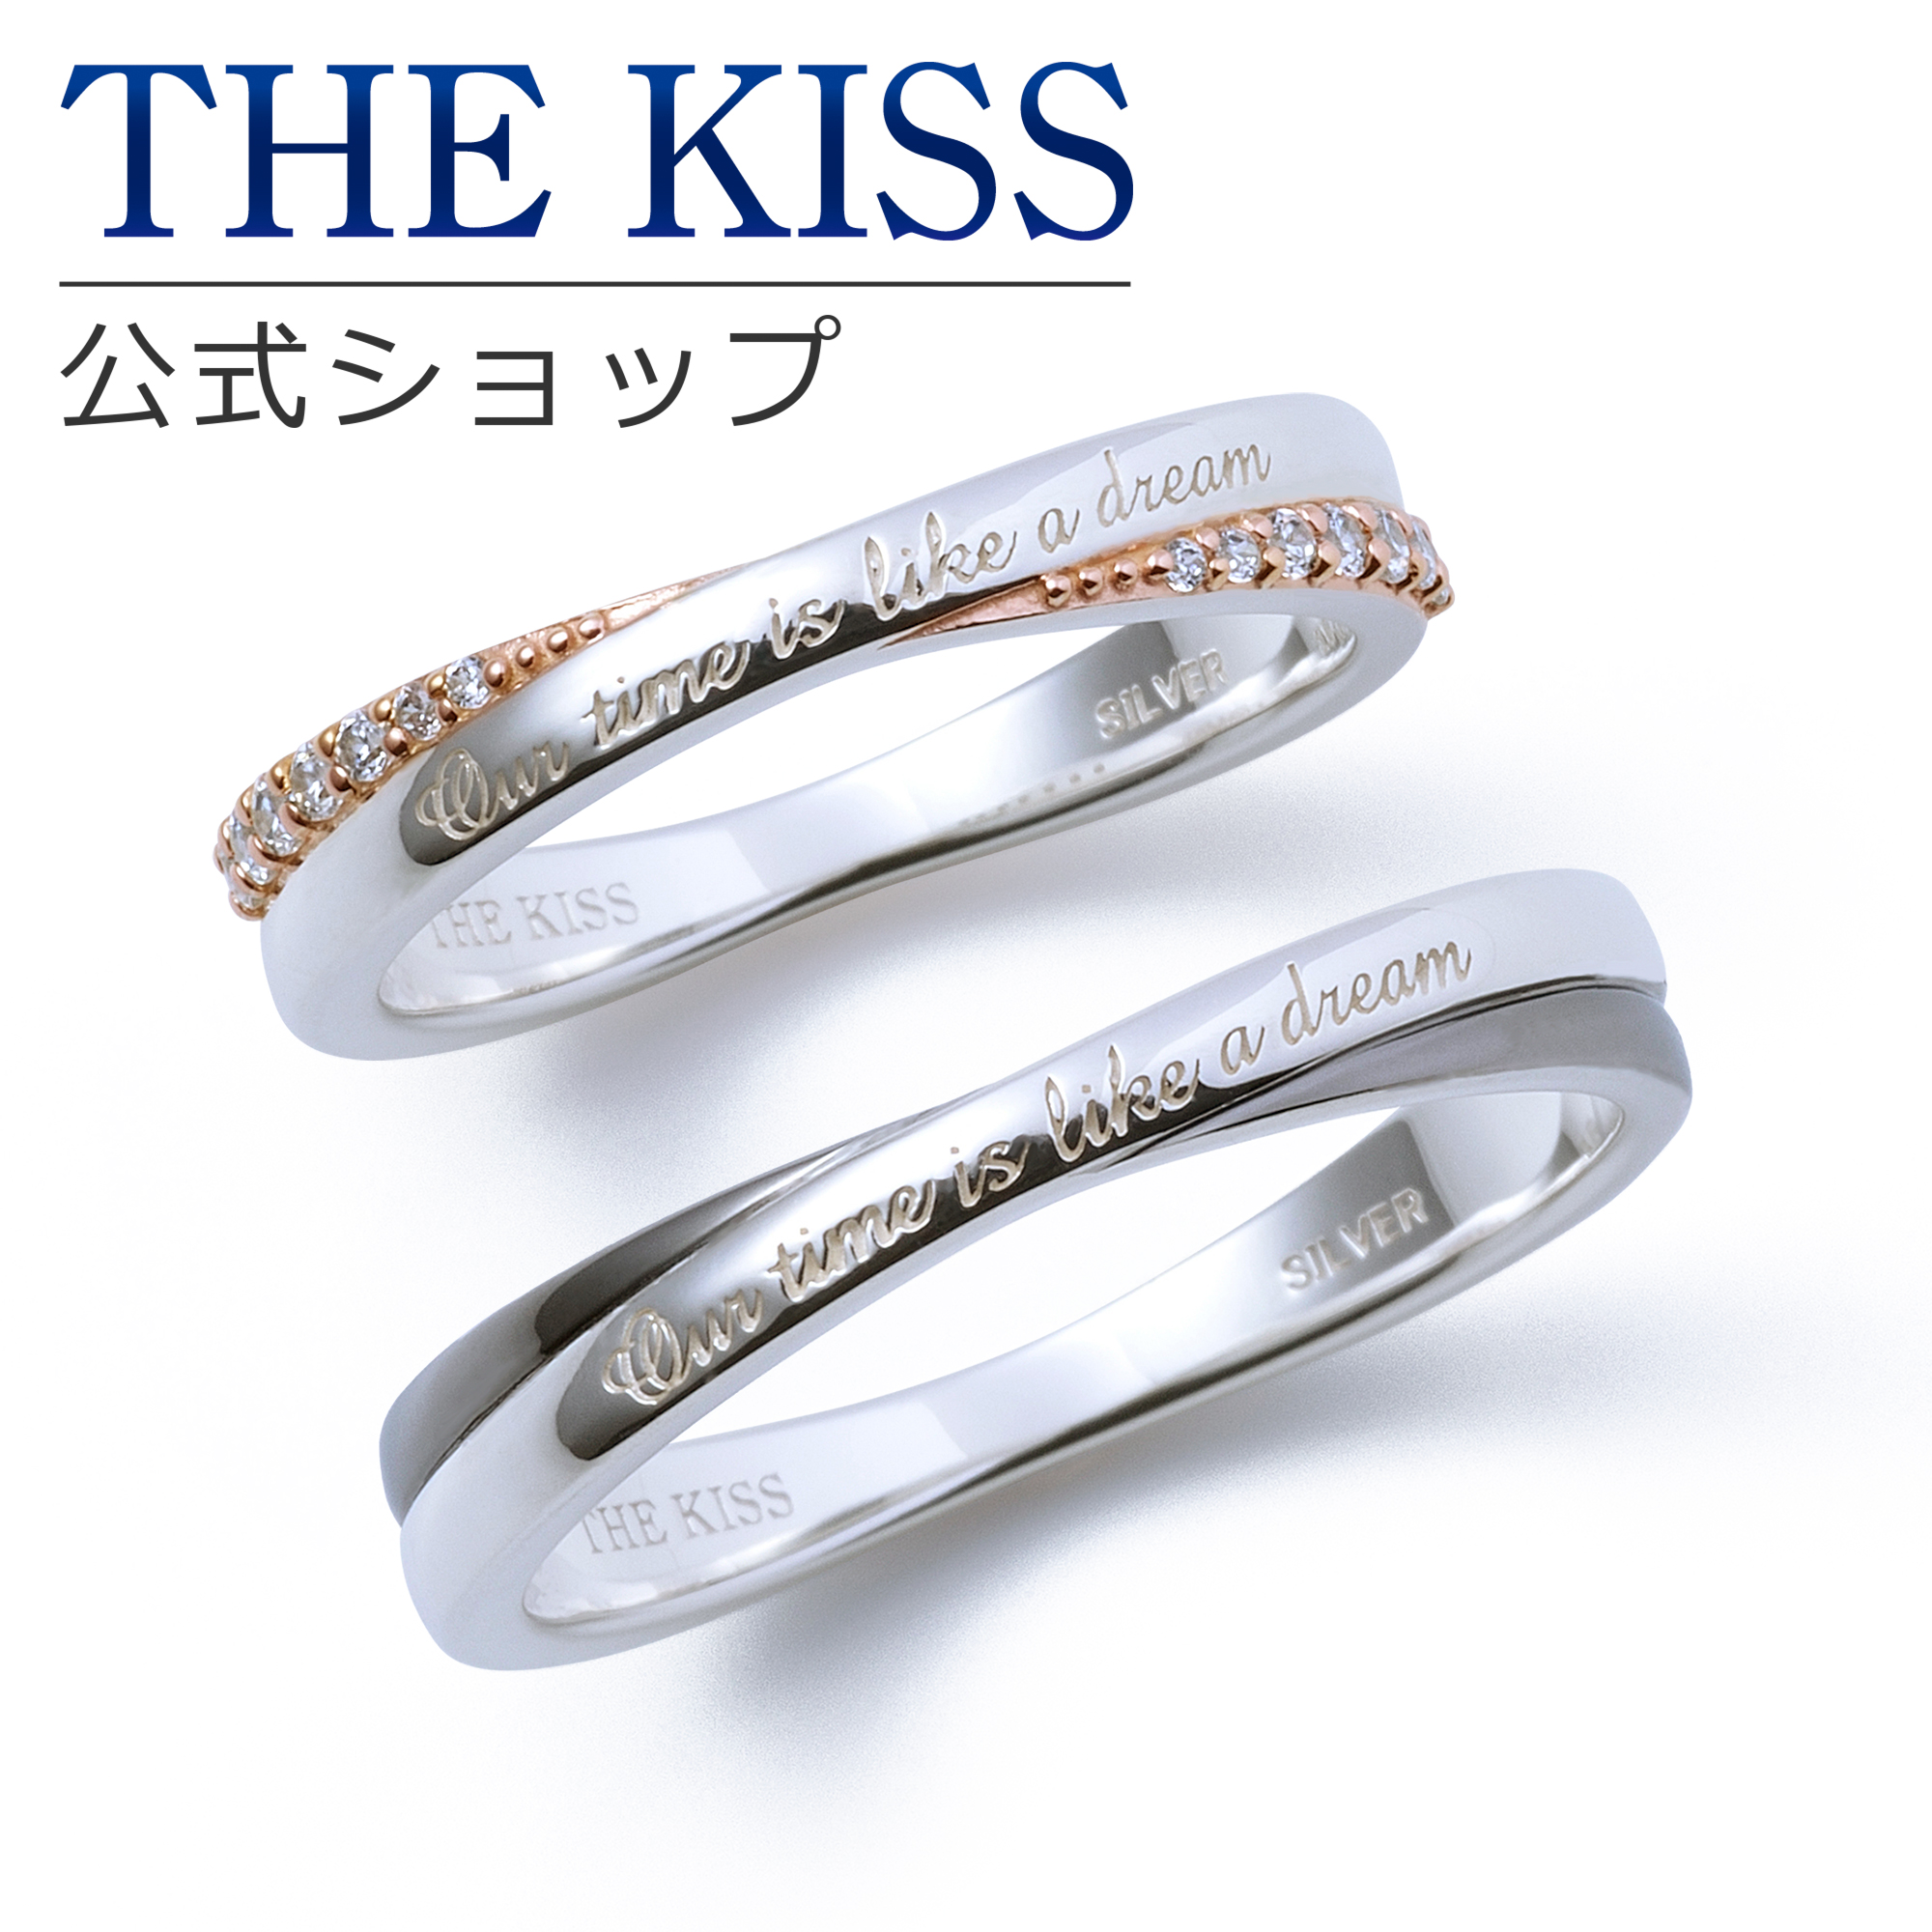 THE KISS リング - 通販 - pinehotel.info